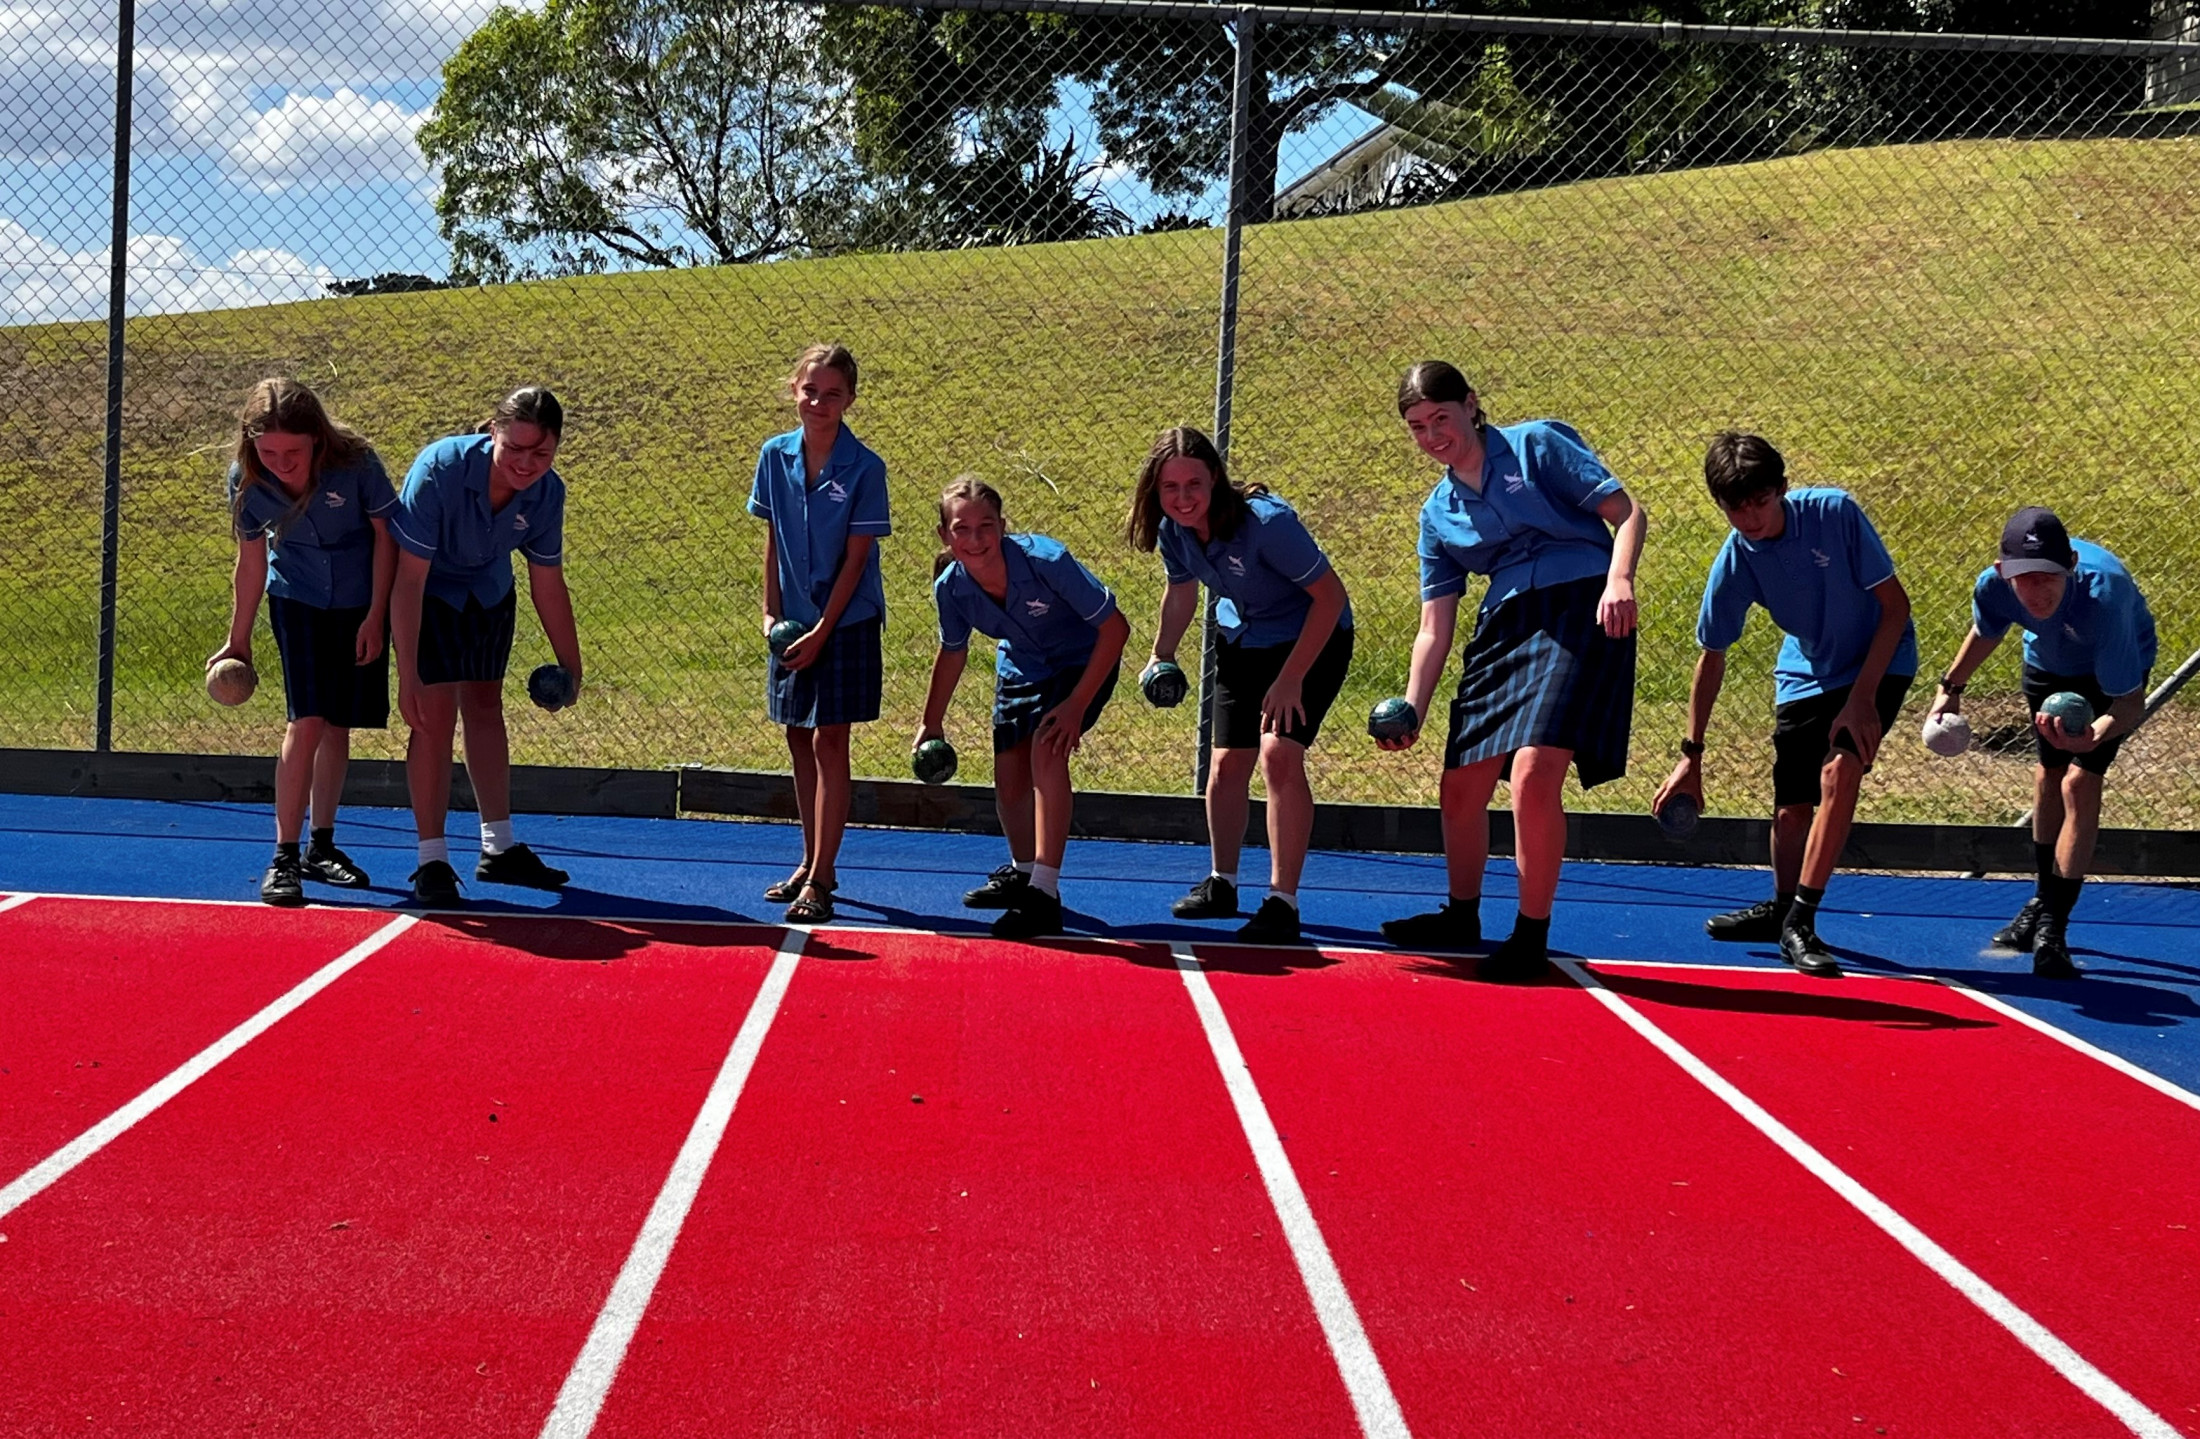 Students embrace the challenge of Lawn Bowls